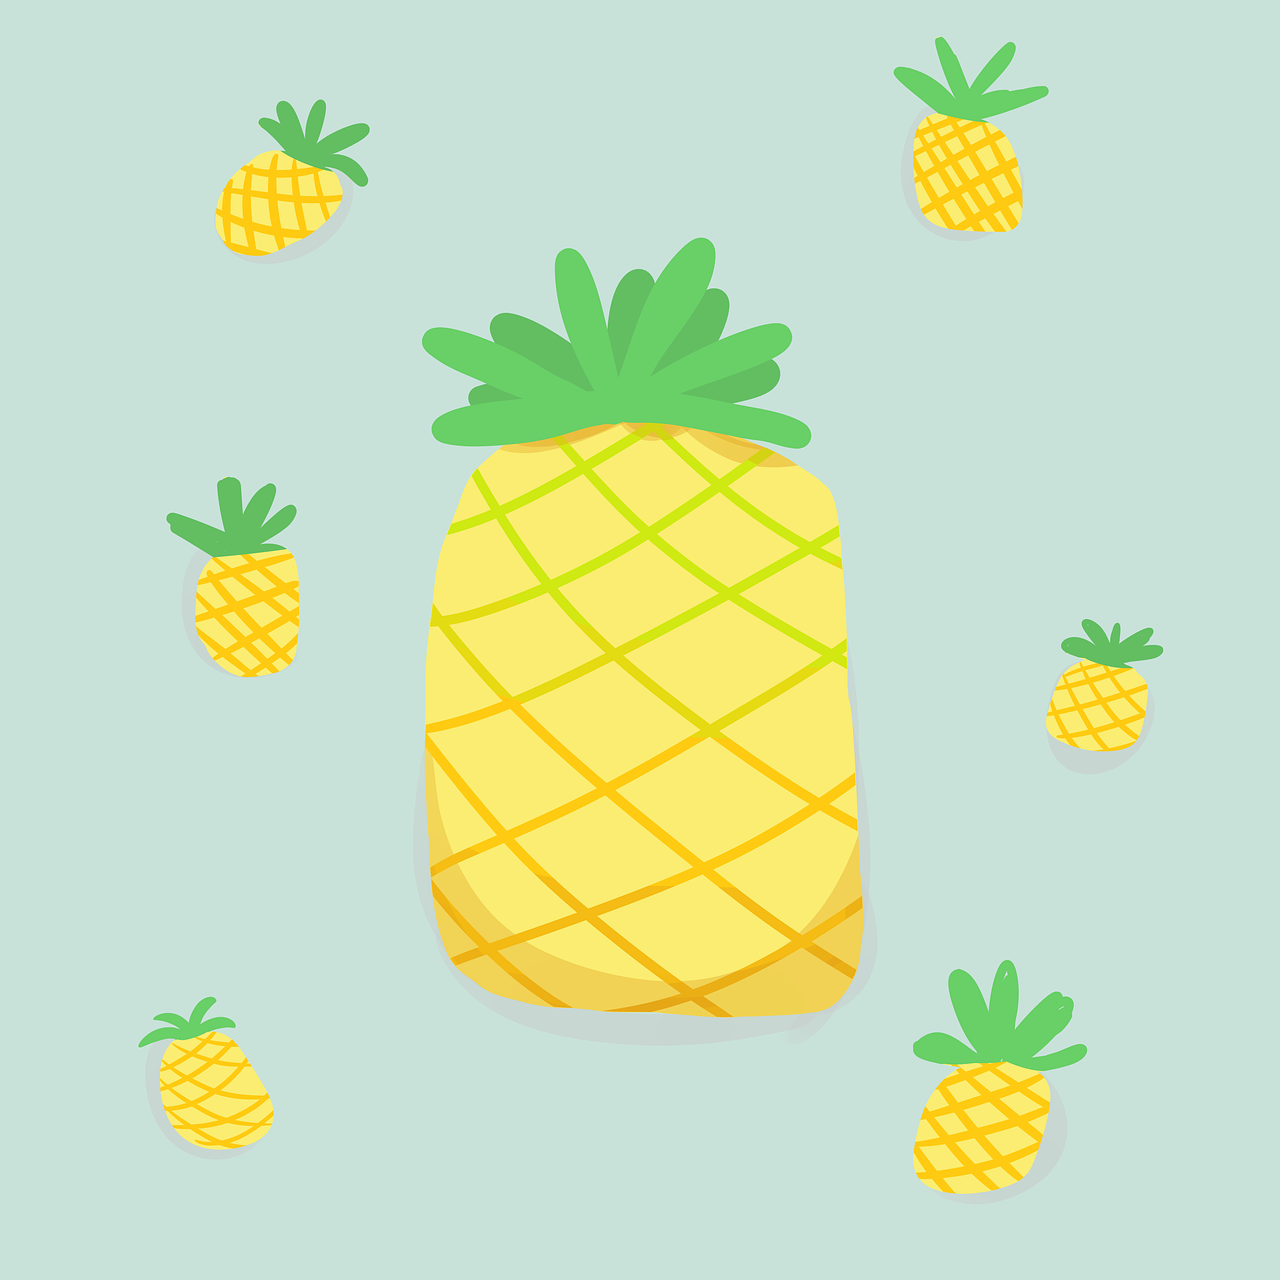 a cartoon pineapple surrounded by smaller pineapples, an illustration of, pop art, simple and clean illustration, view from bottom to top, squishy, flat design